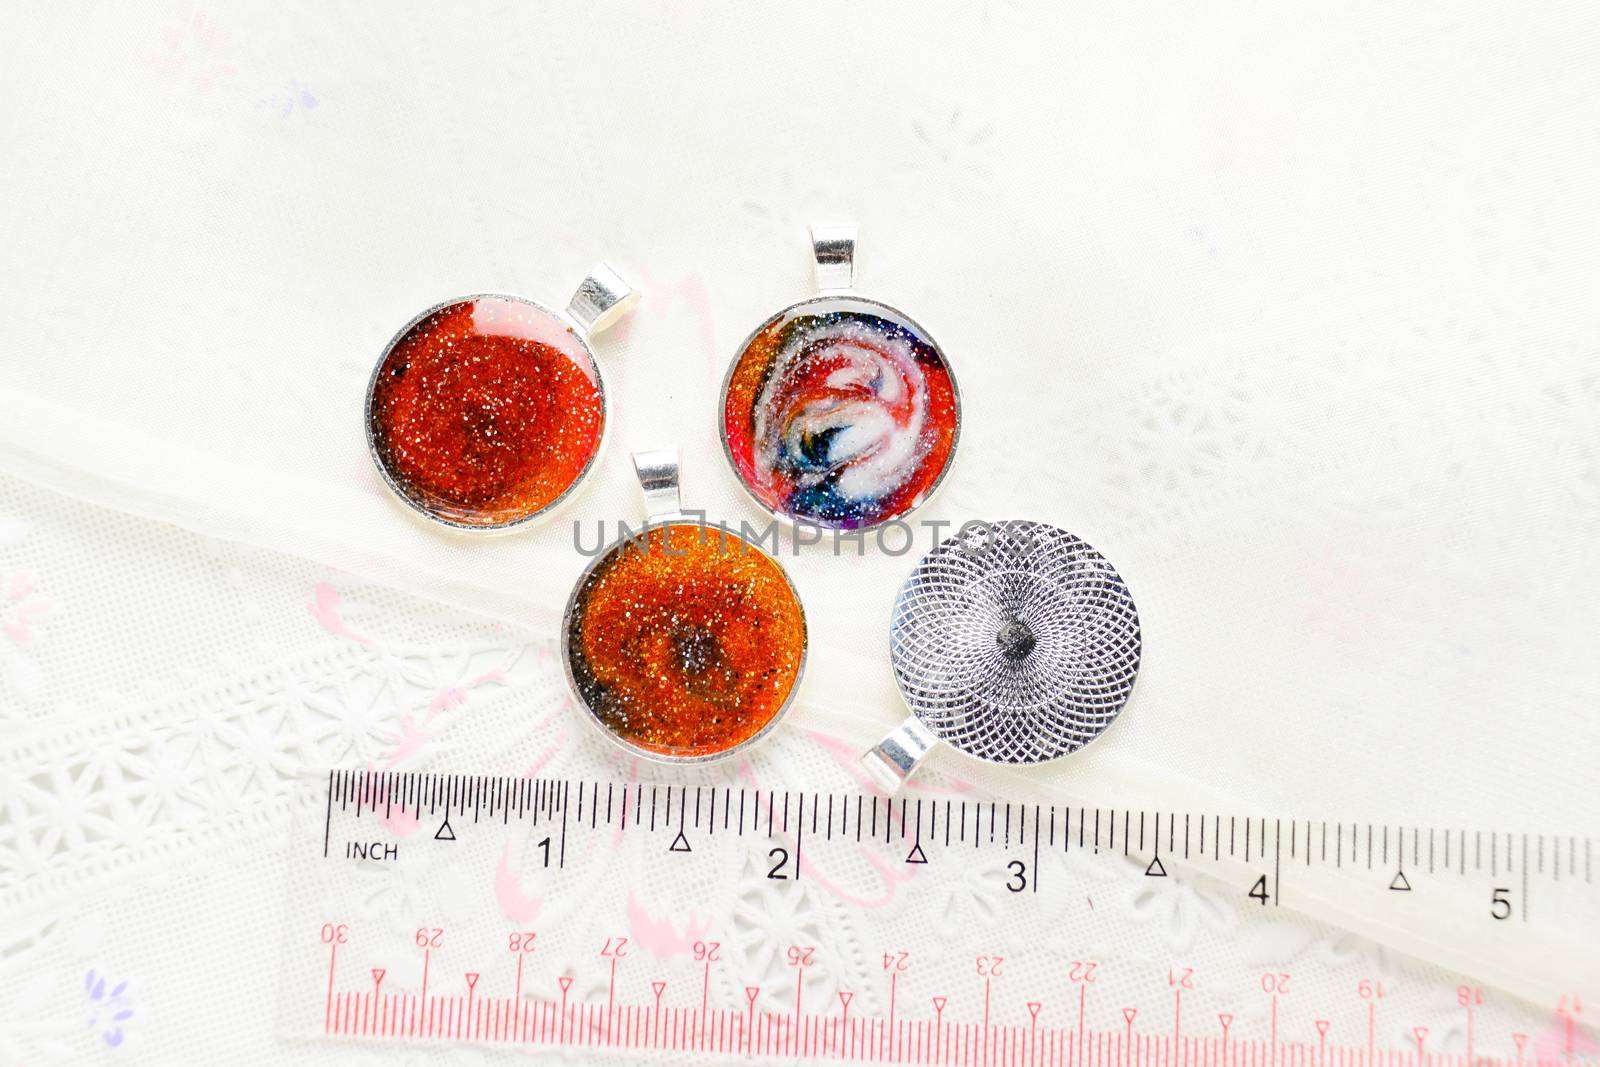 Create galaxy drink coasters using resin, glitter and pigment po by yuiyuize